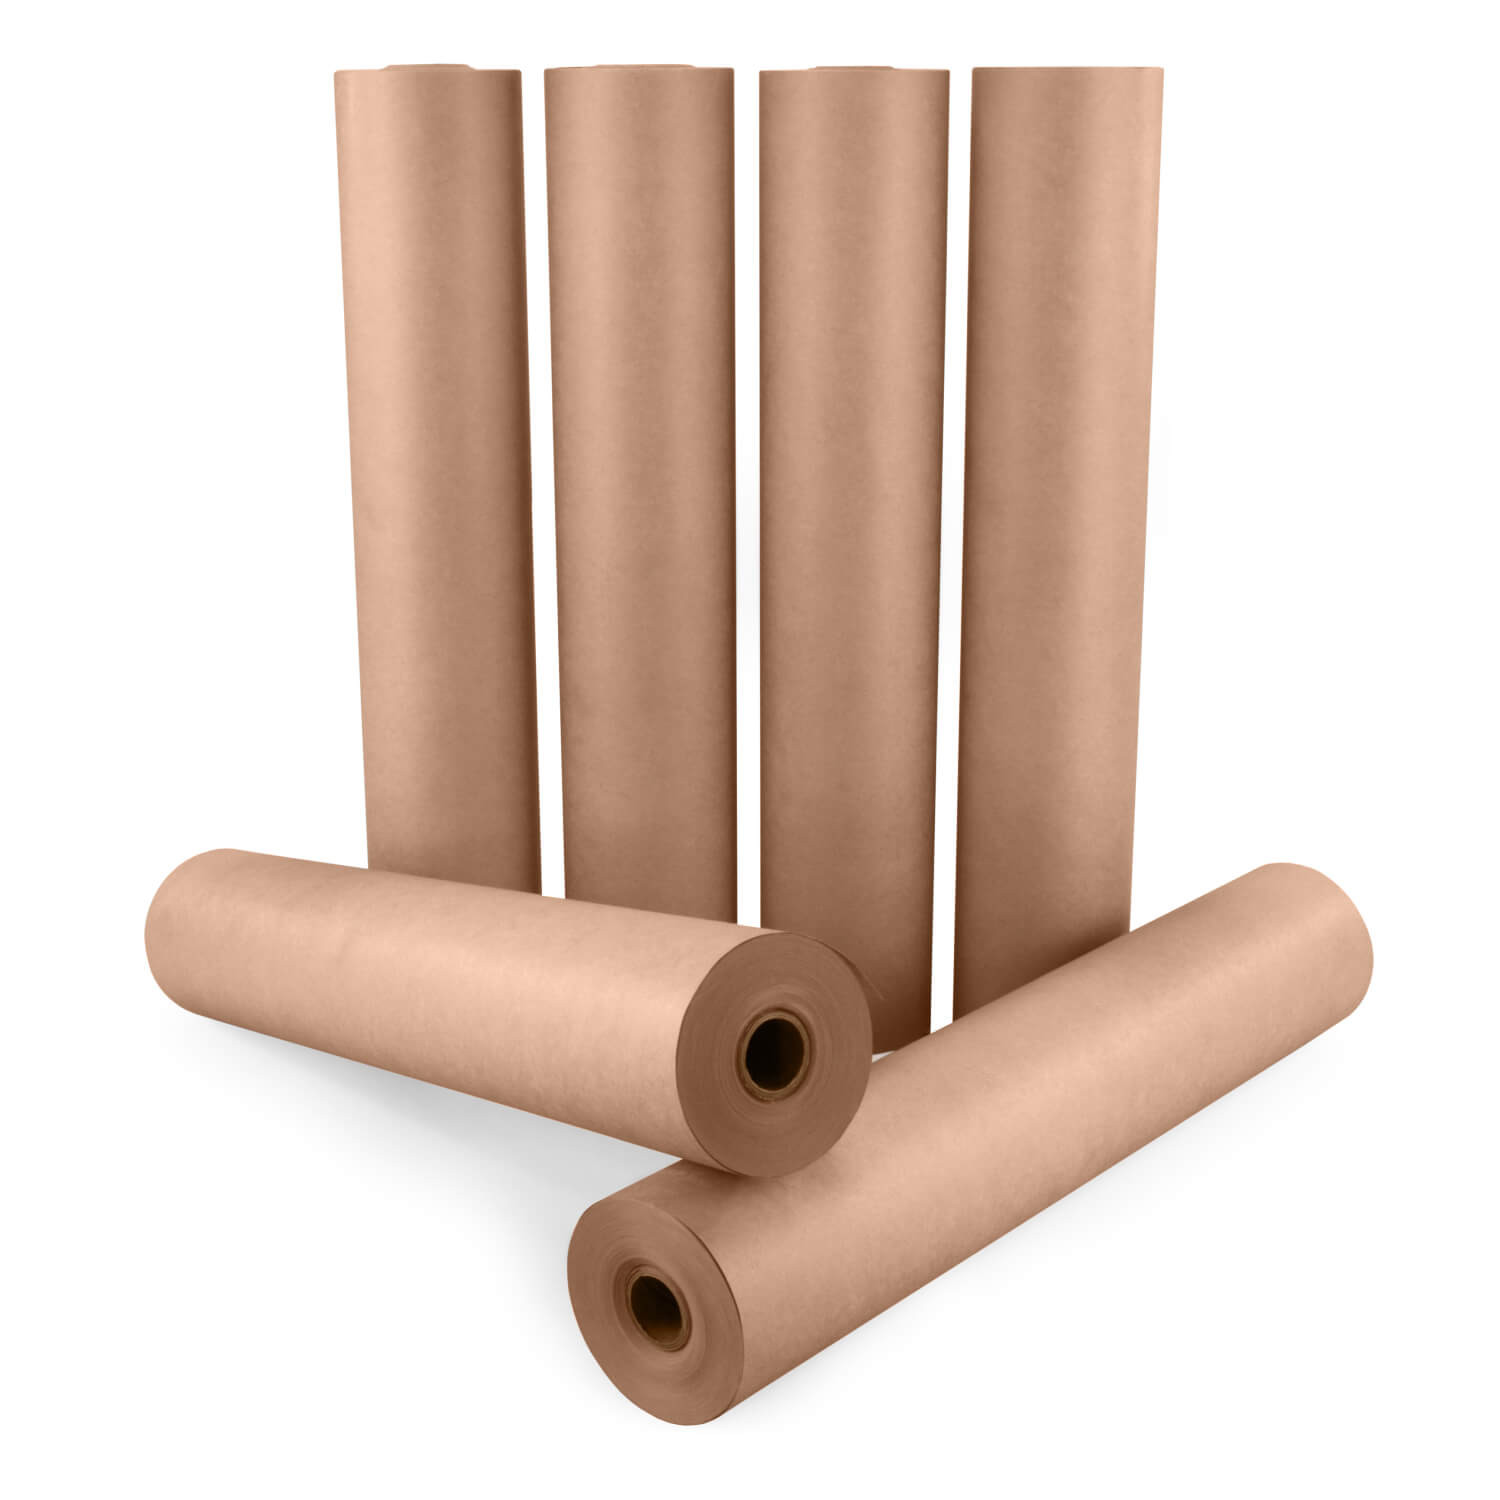 Idl Packaging Red Kraft Paper Roll 36 x 180', Both-Sided, Fade-Resistant, Made in The USA, Thick 45 lbs (Pack of 1) - Colored Paper for Kids Crafts